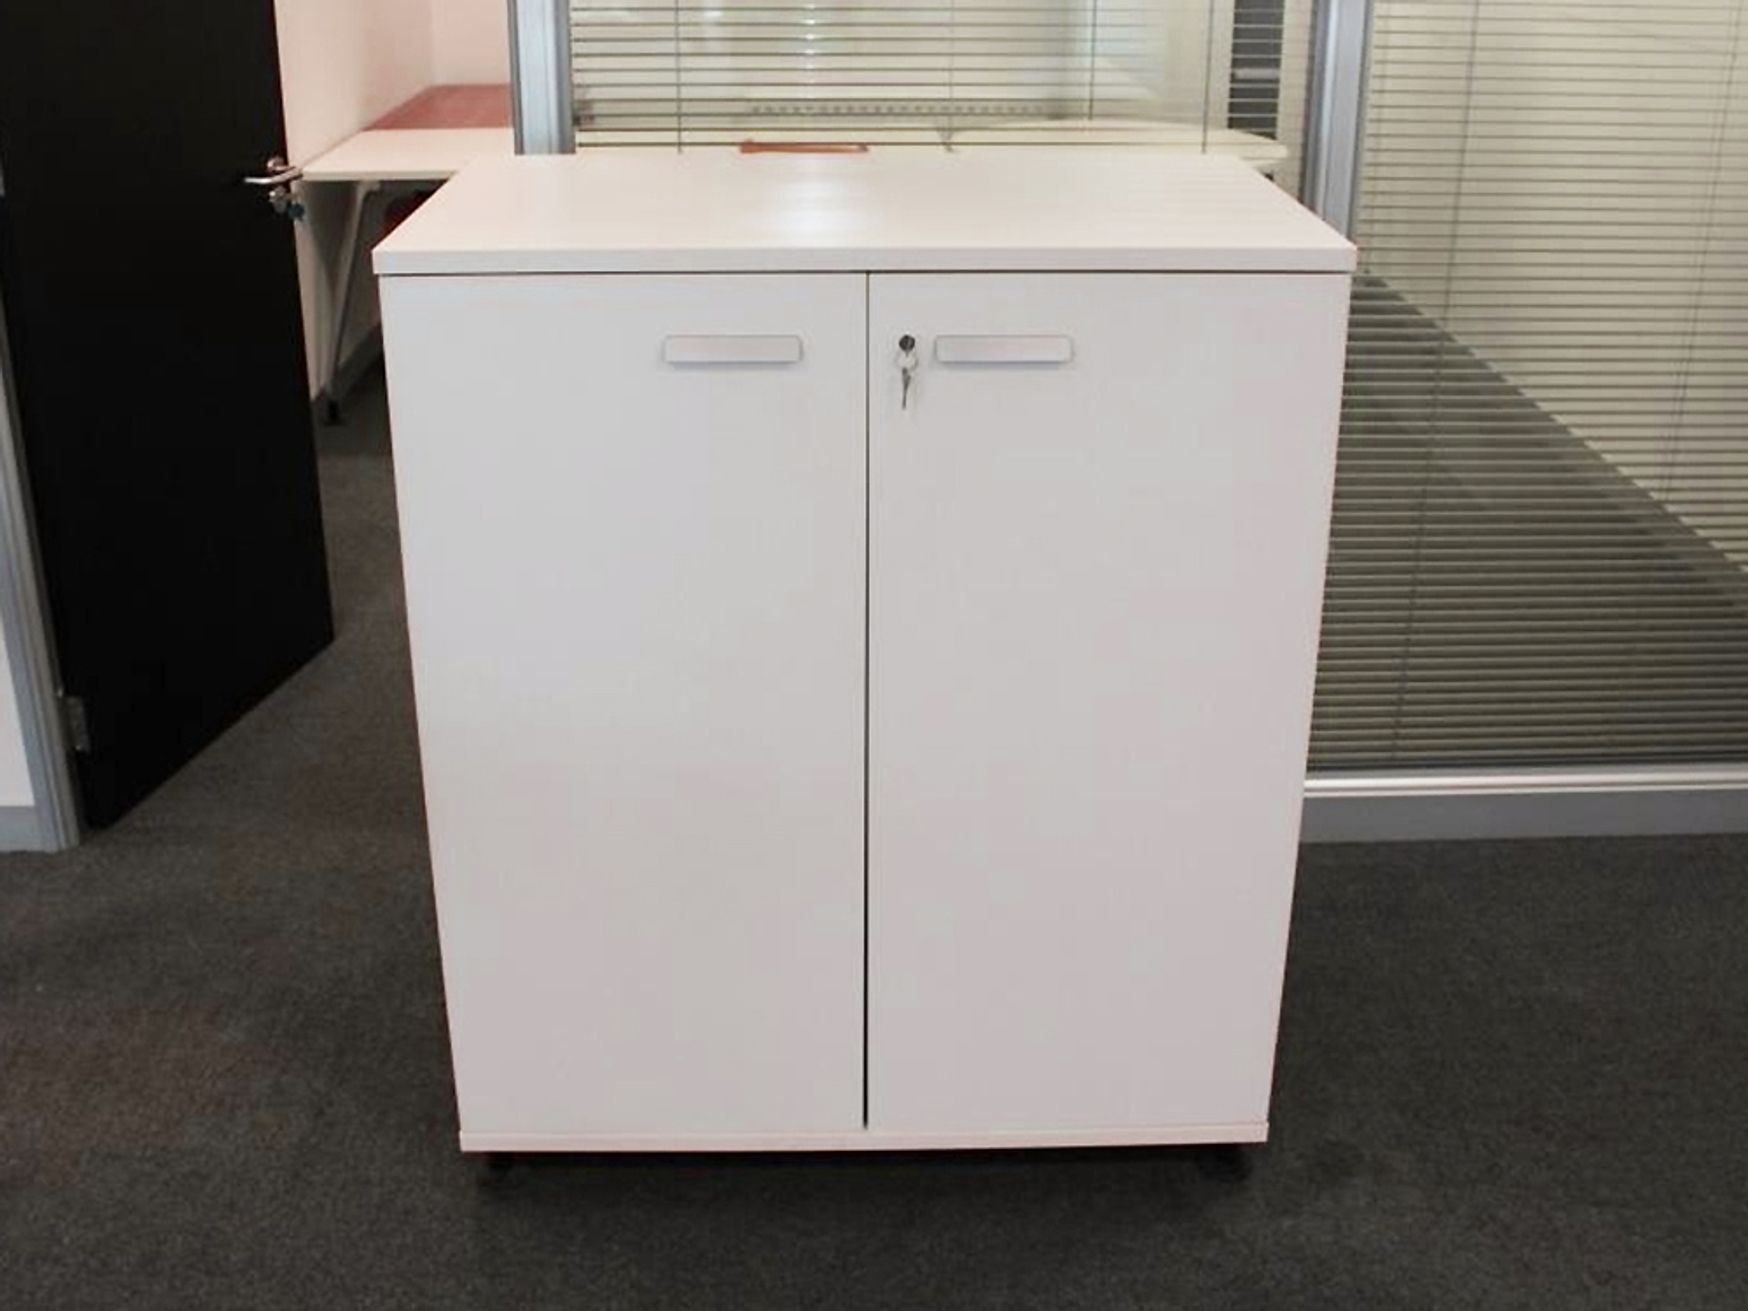 Want Dont Want Com Second Hand Office Furniture Used Office